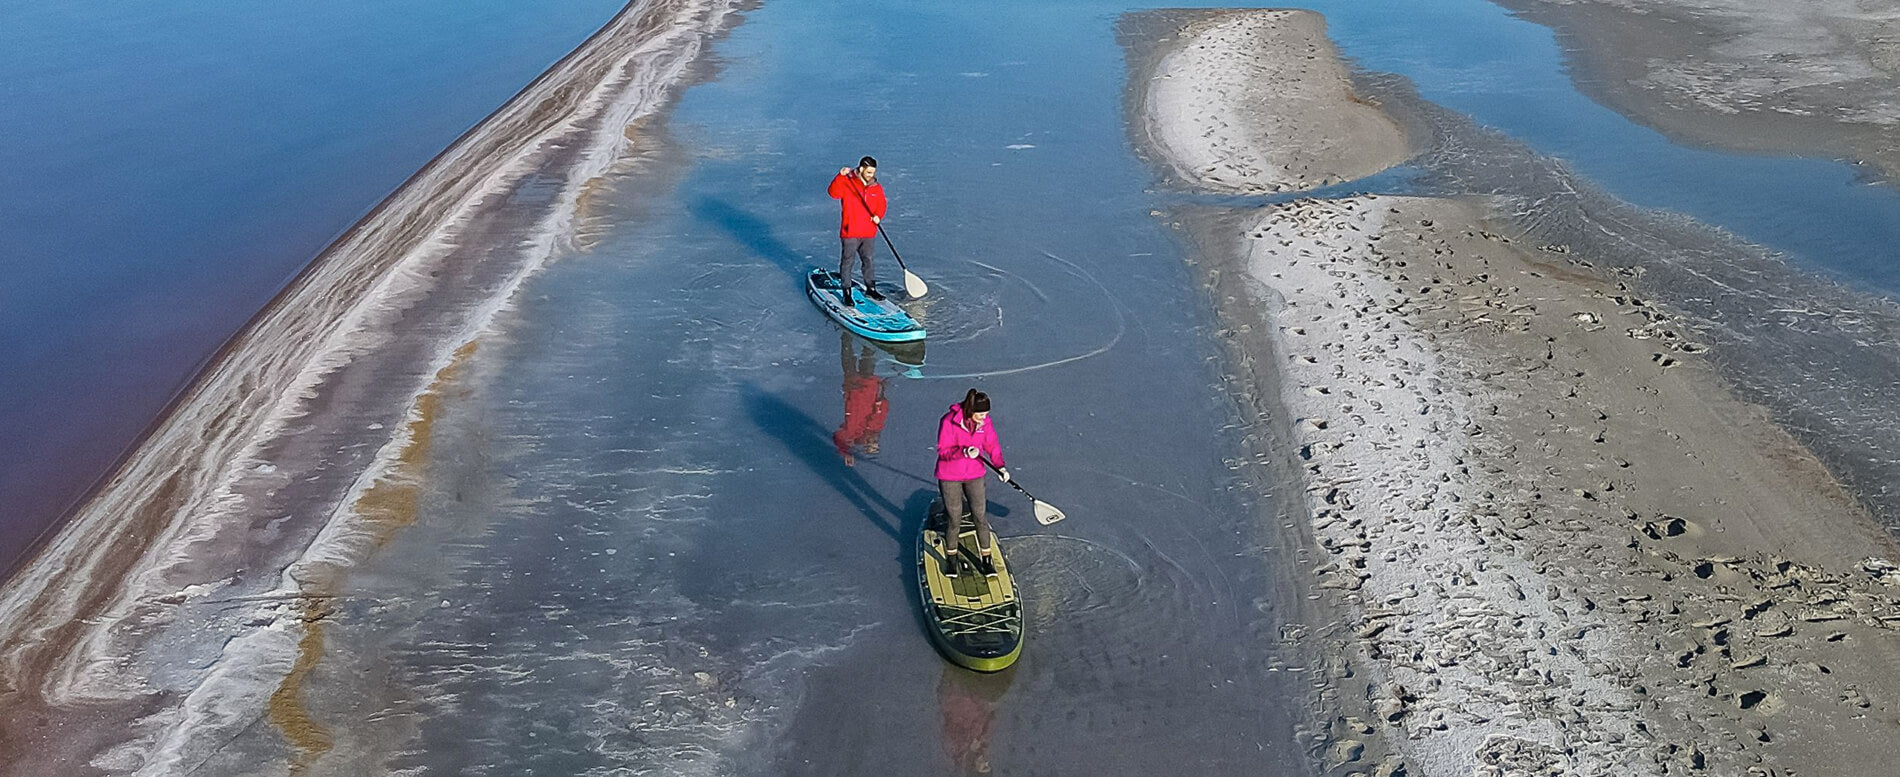 Couple with complete winter gear while paddle boarding